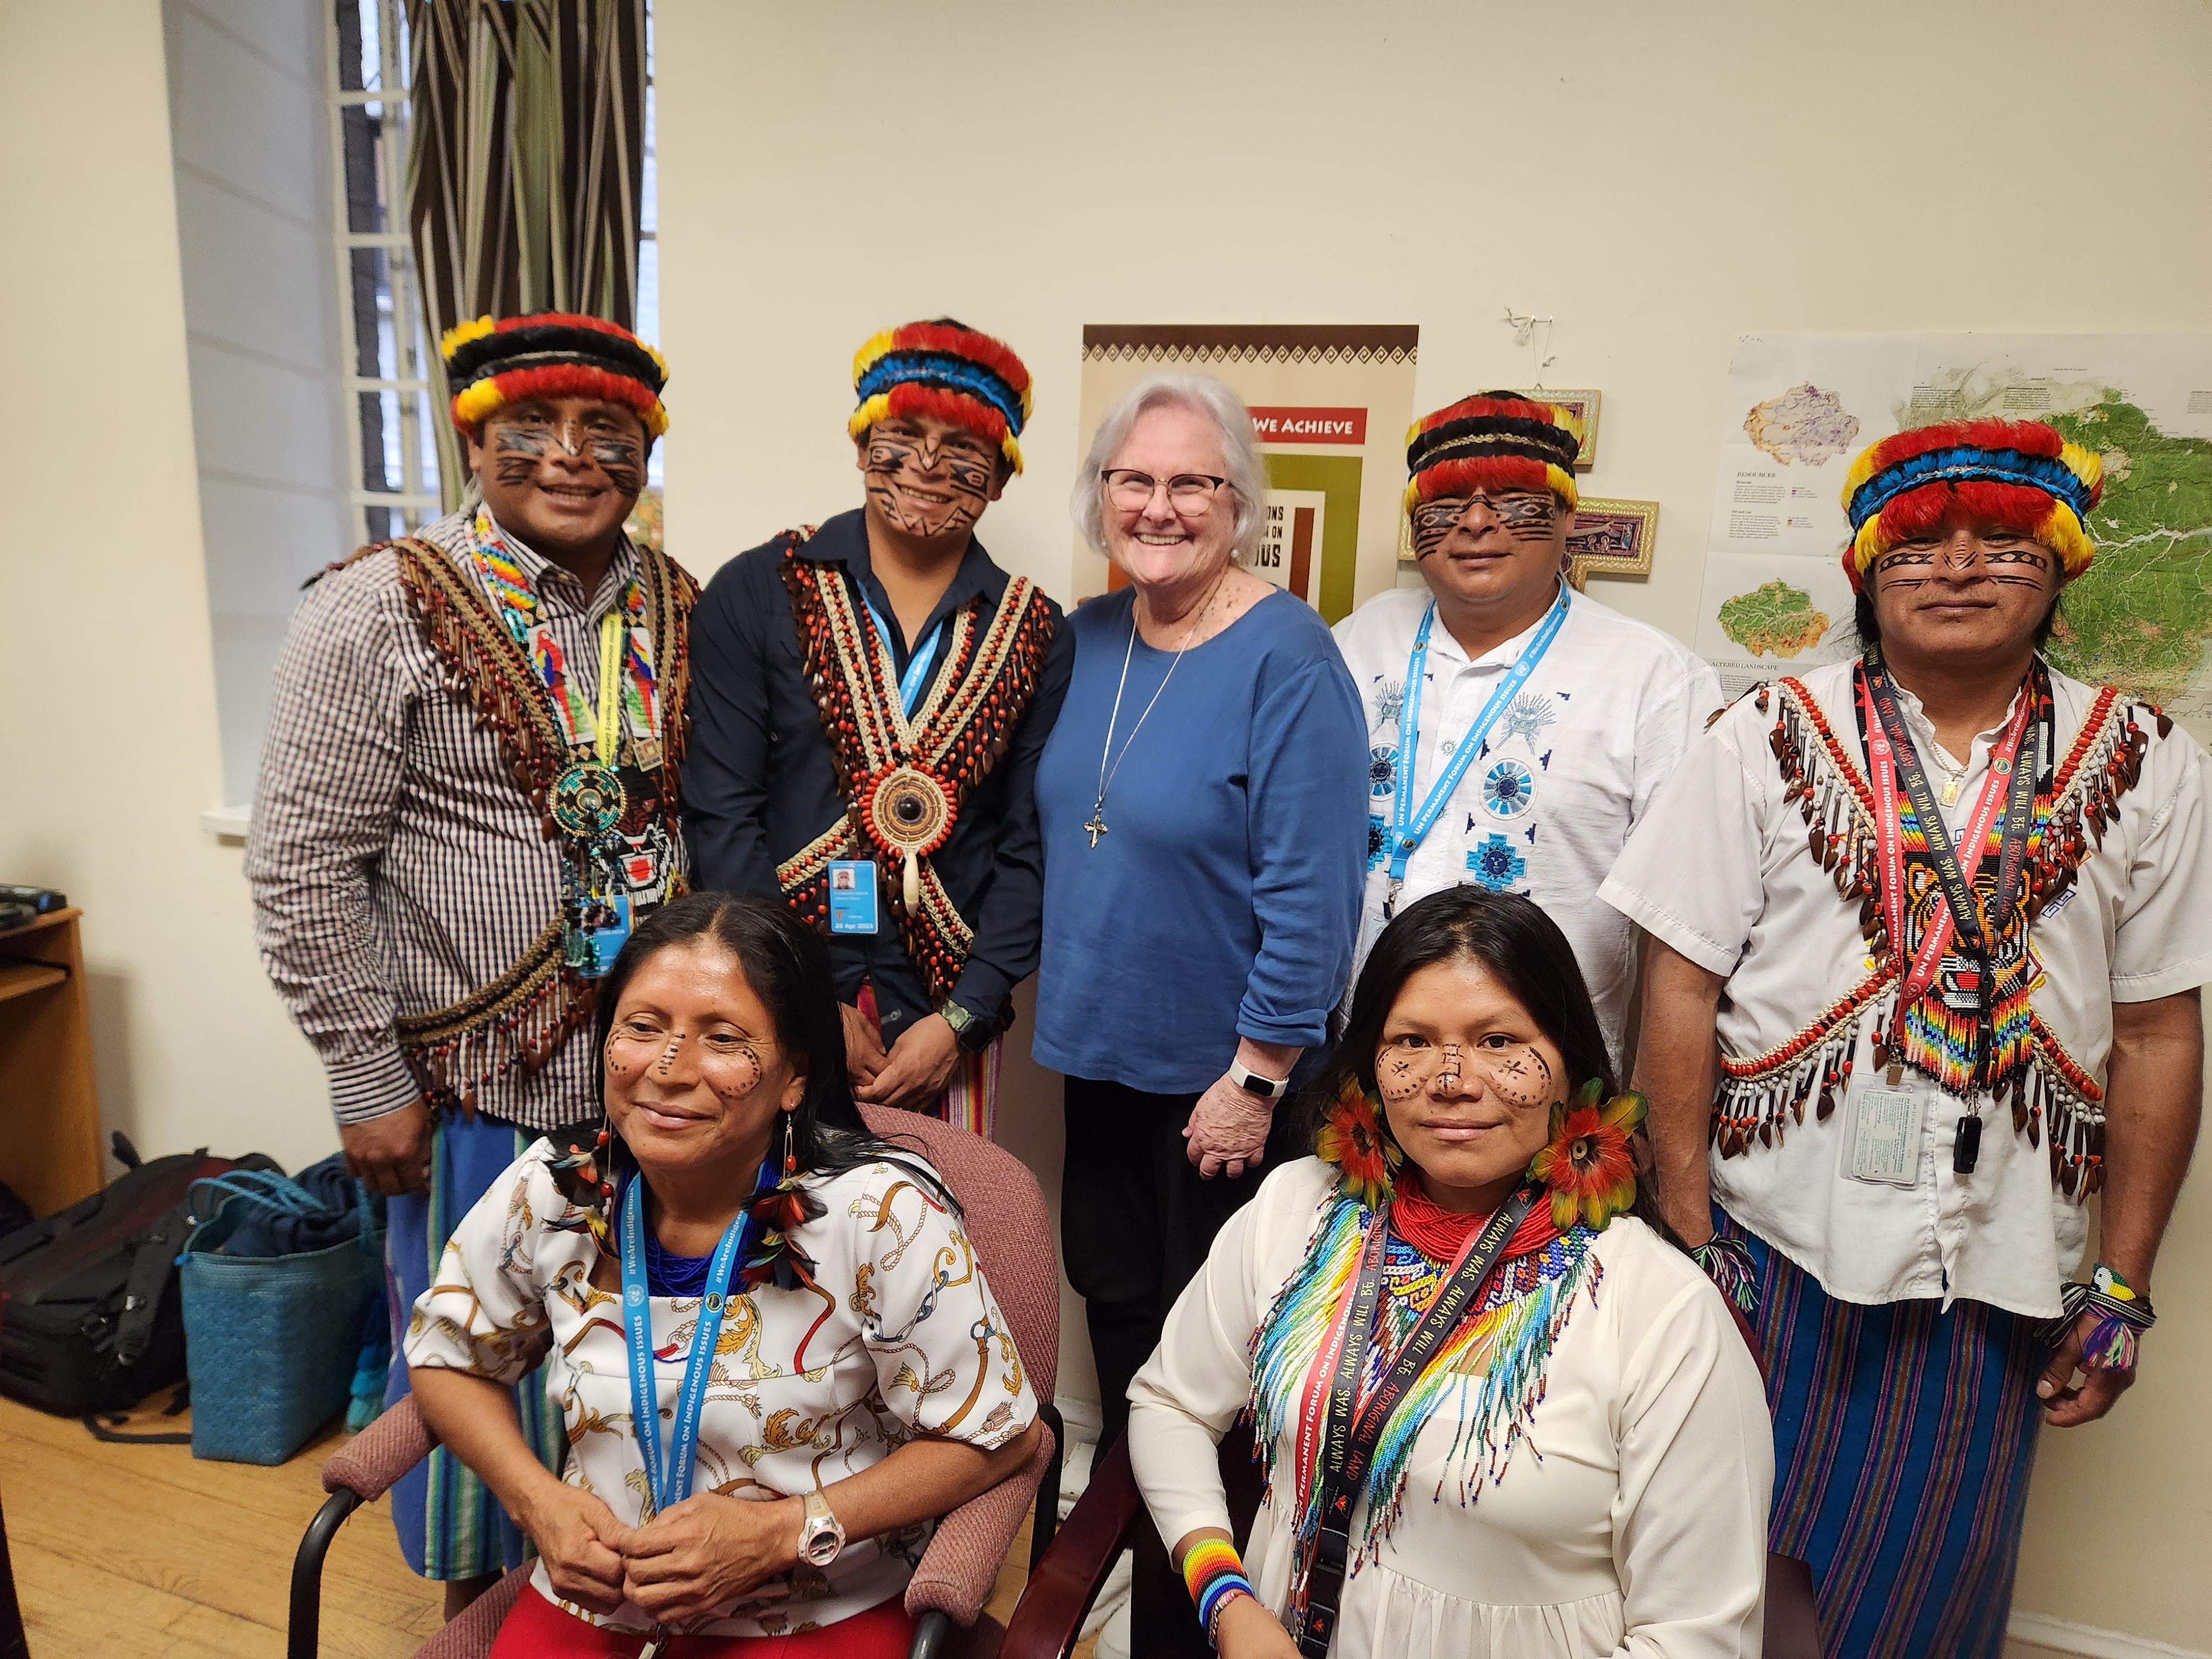 Adrian Dominican Sr. Dusty Farnan, center, with members of a delegation from the Achuar nation in the Ecuadorian Amazon area during the United Nations Permanent Forum on Indigenous Issues, held April 17-28 at U.N. headquarters in New York (GSR photo/Chris Herlinger)